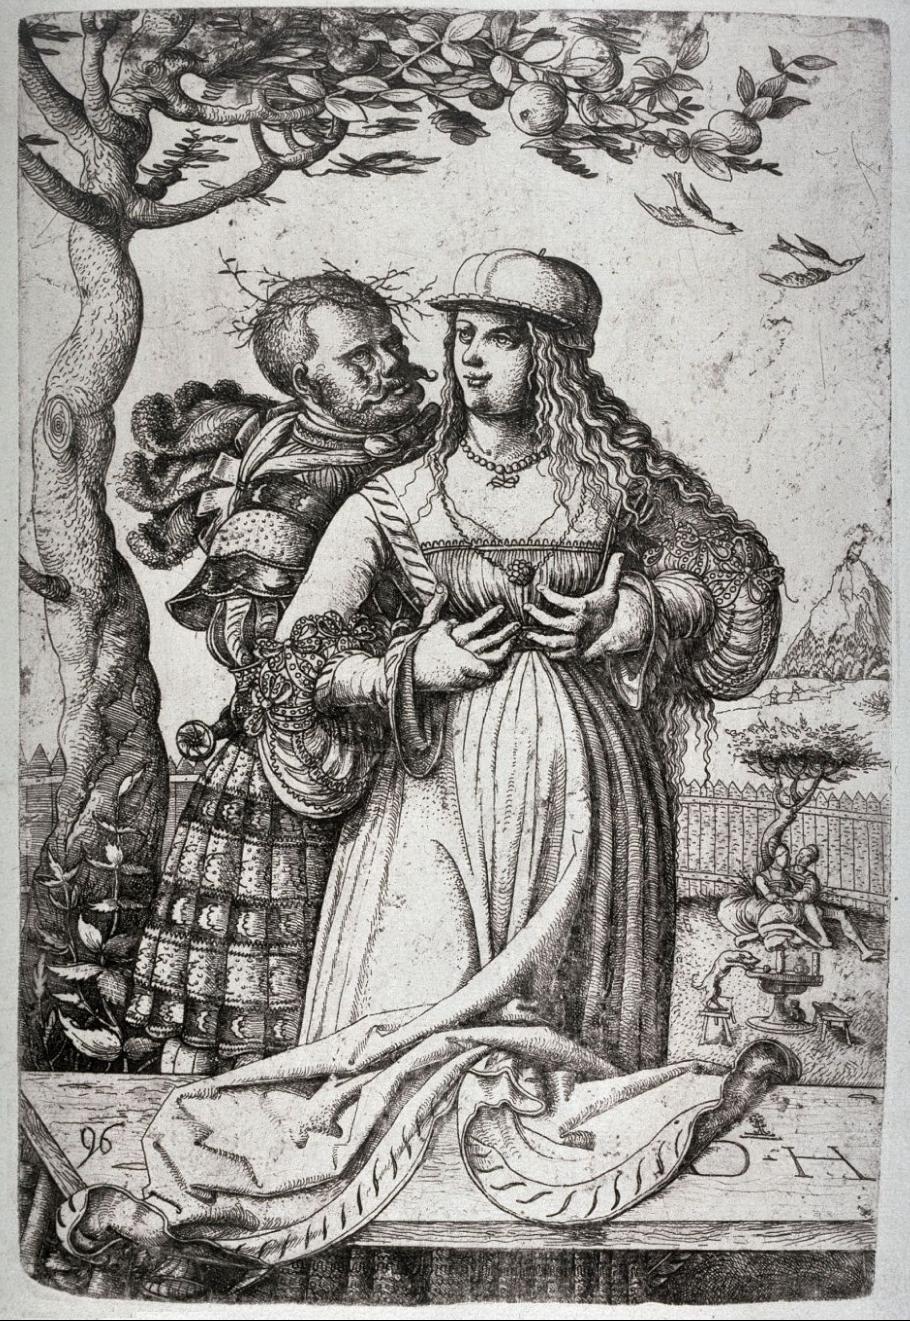 Man embracing a woman - 16th century etching